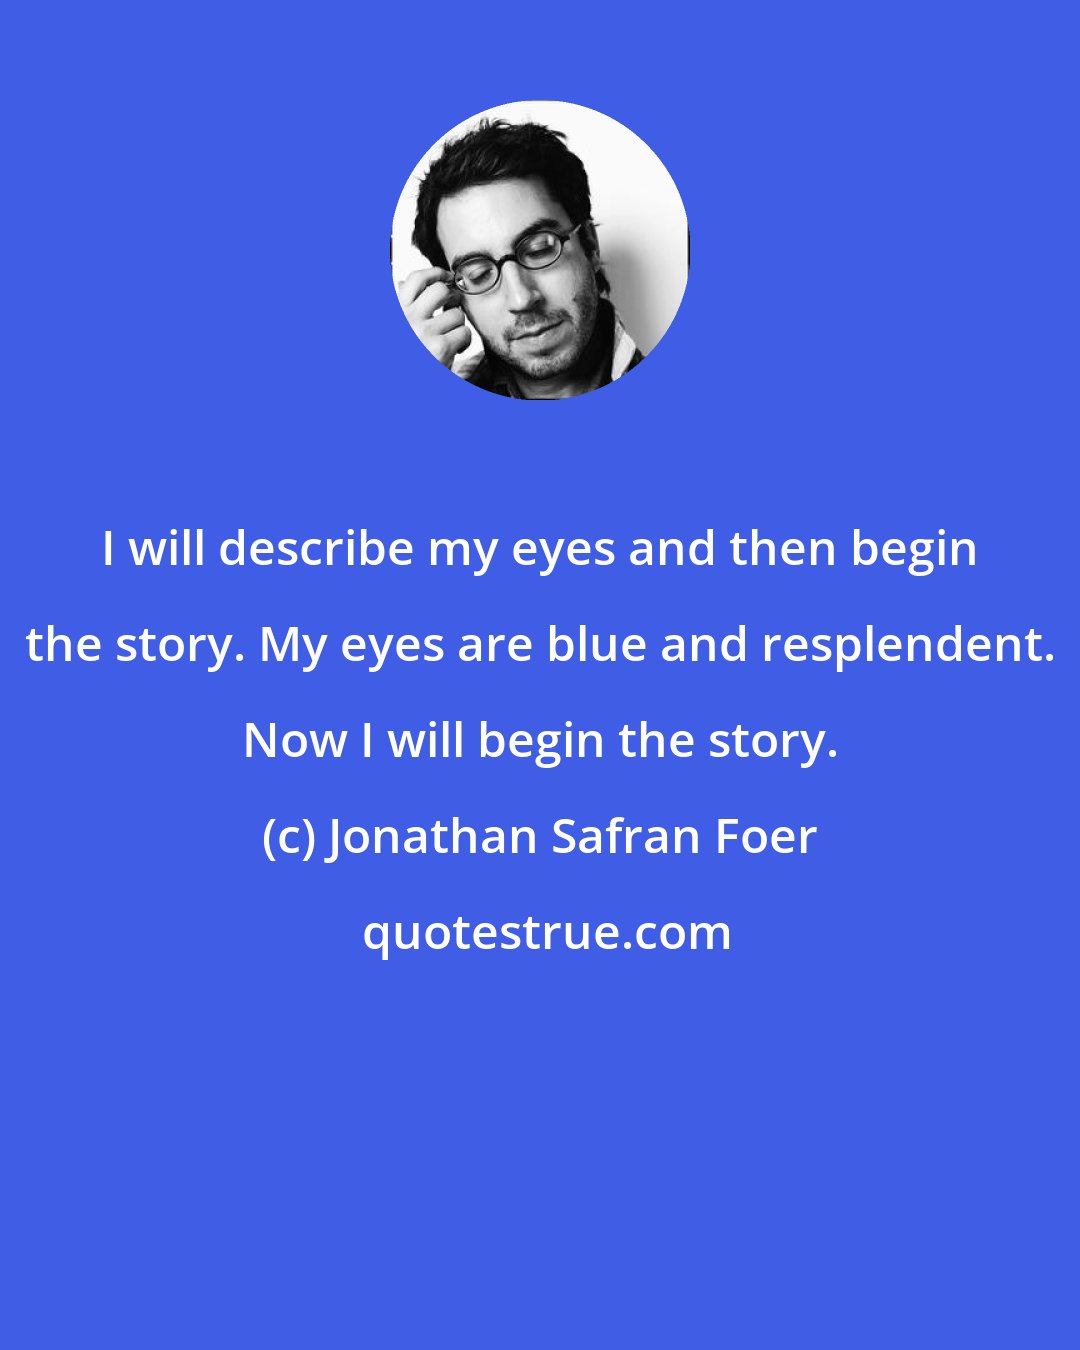 Jonathan Safran Foer: I will describe my eyes and then begin the story. My eyes are blue and resplendent. Now I will begin the story.